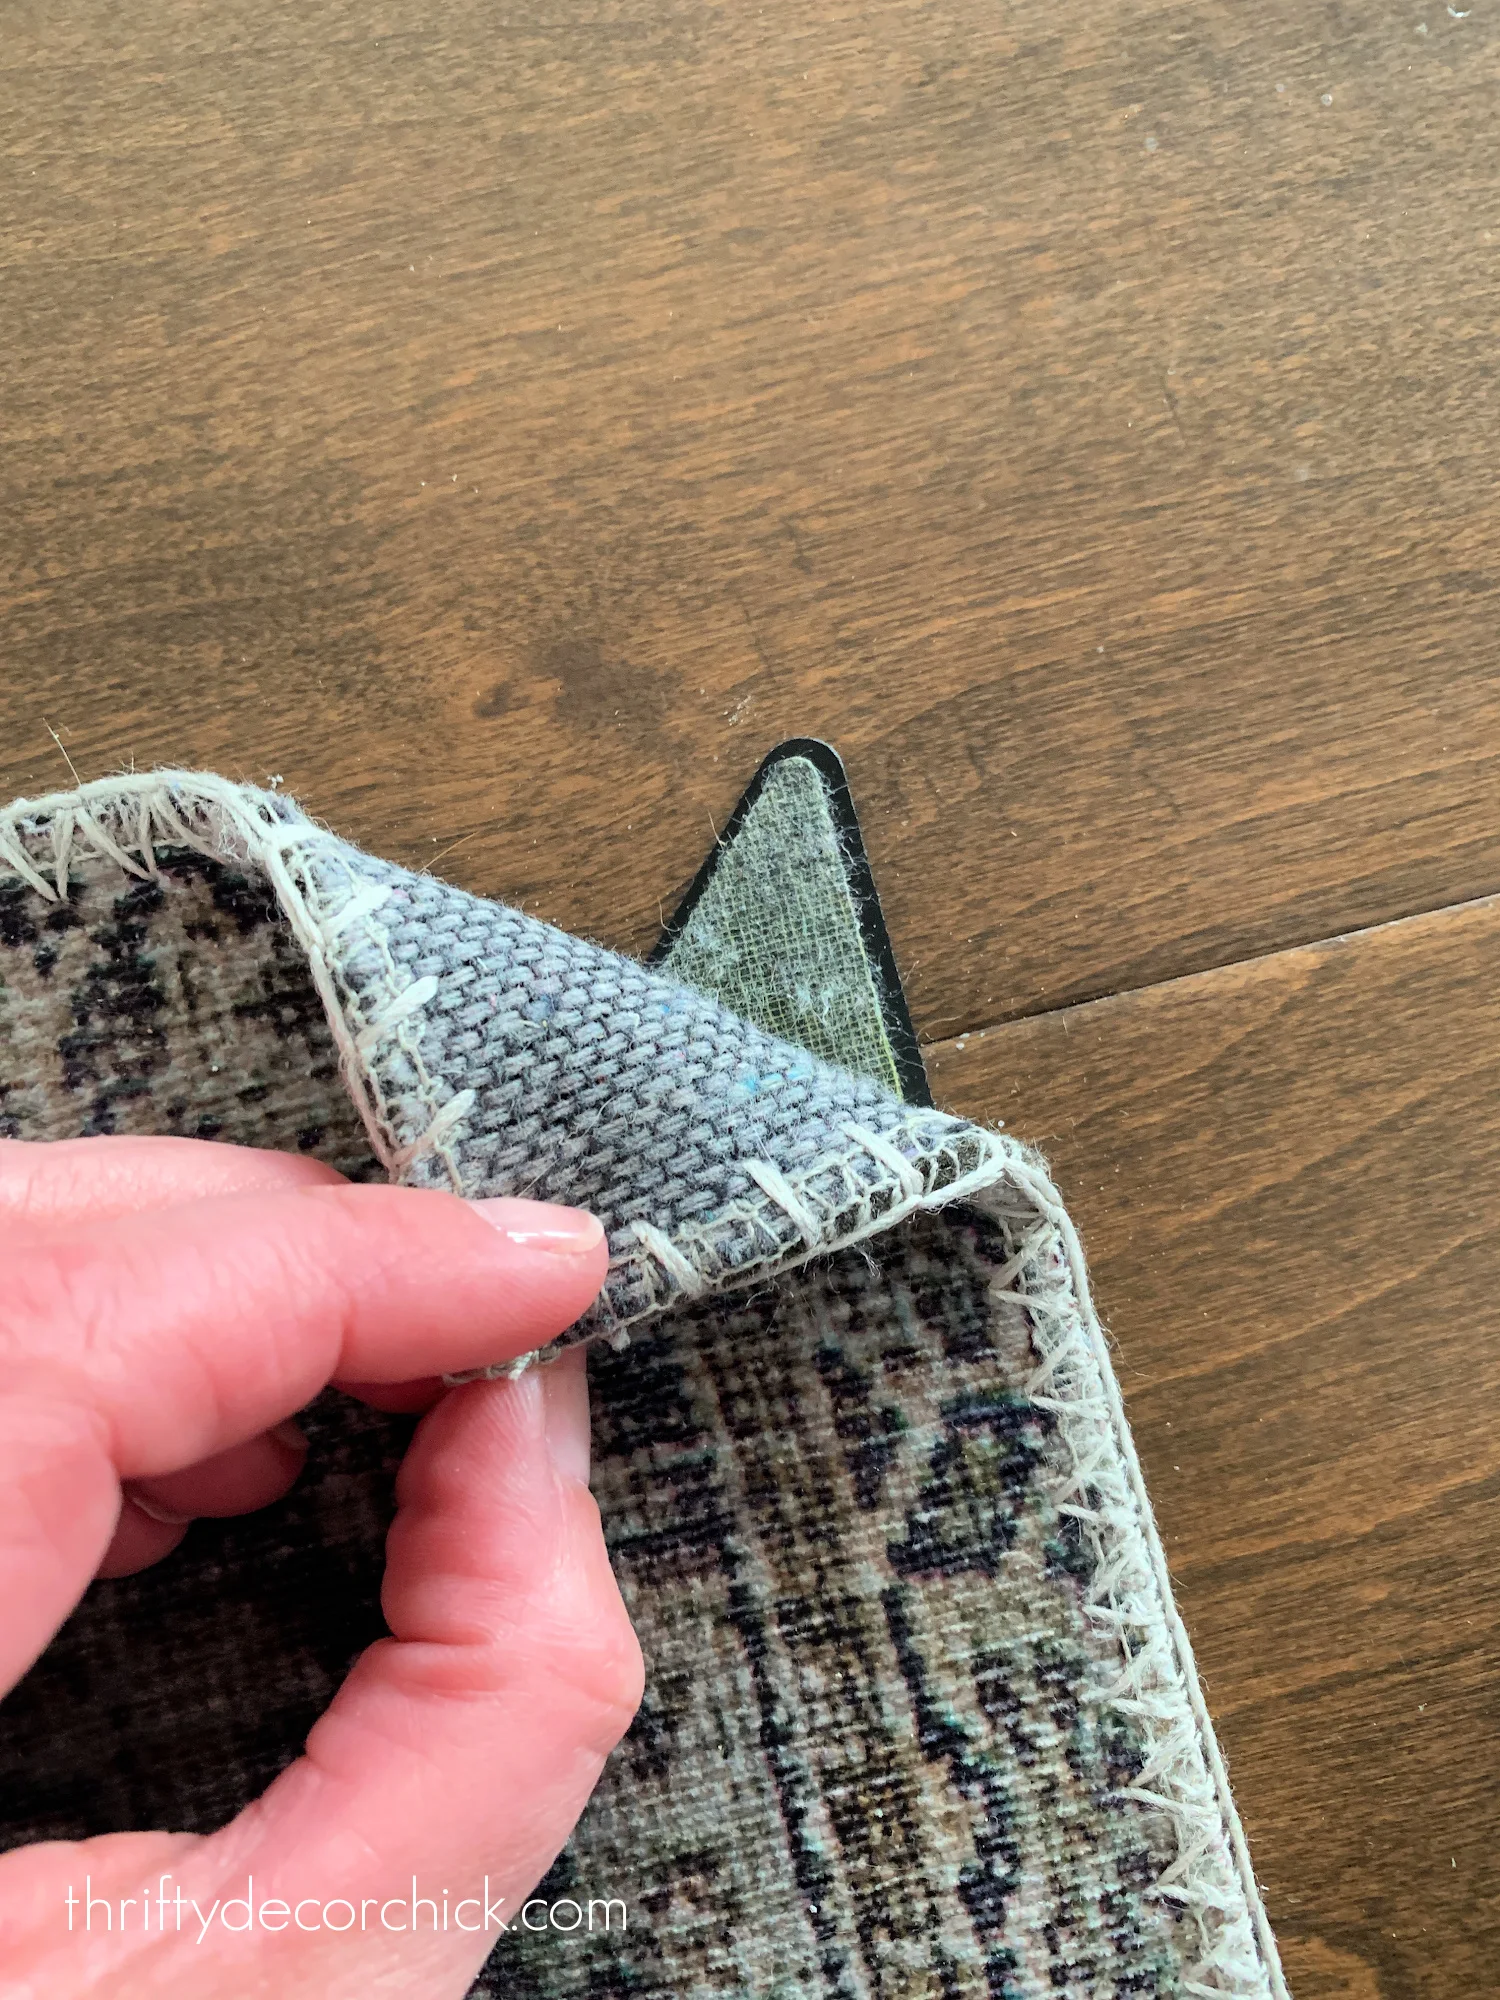 rug grippers for hard floors